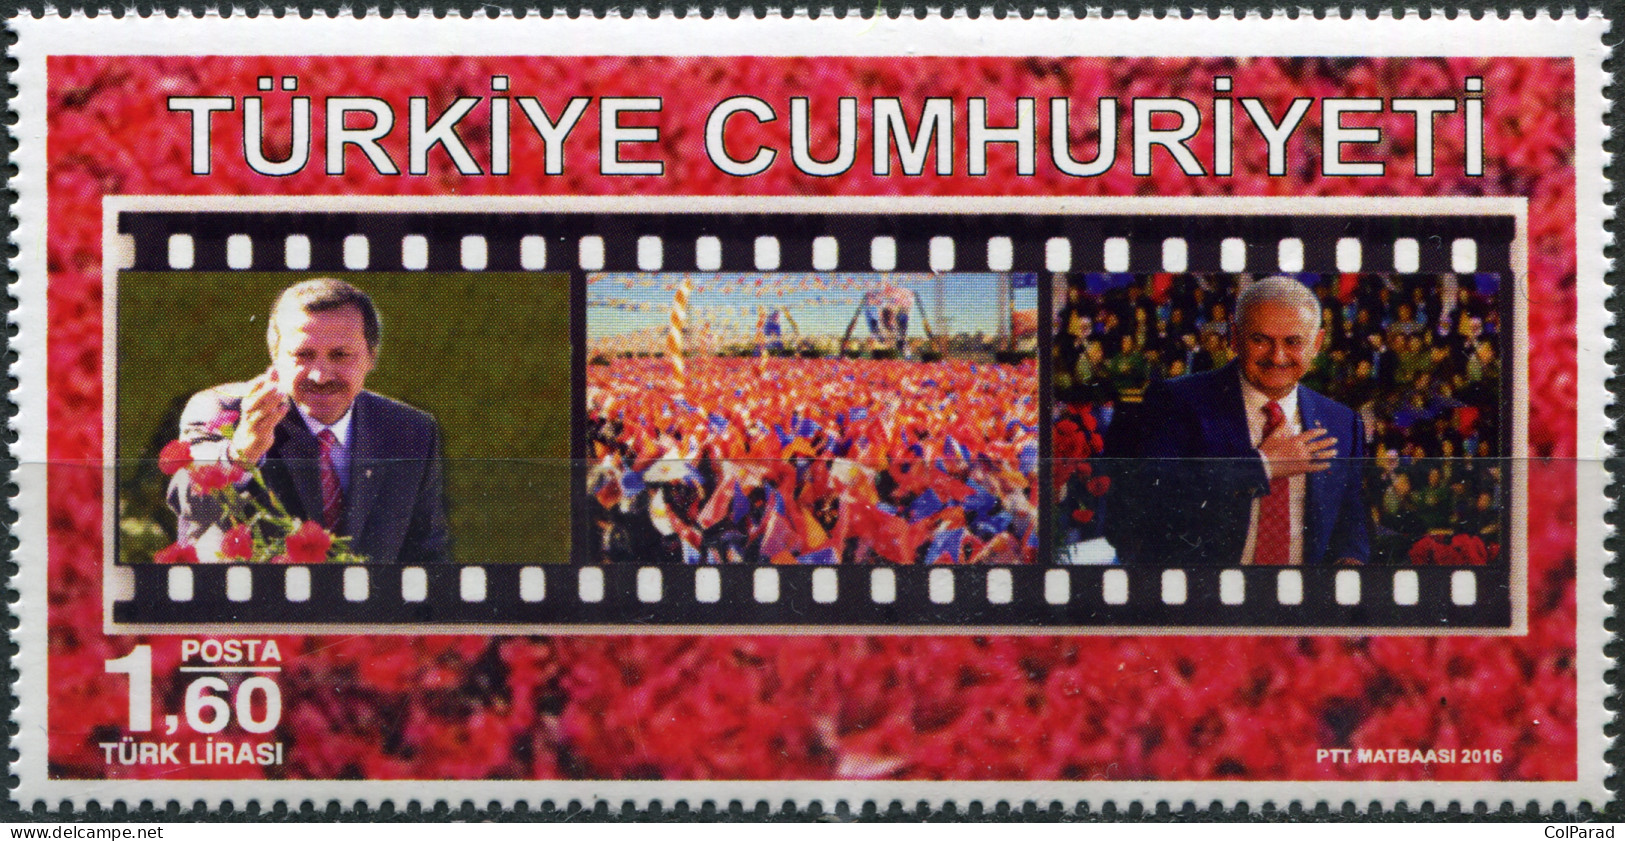 TURKEY - 2016 - STAMP MNH ** - 15 Years Of The Justice And Development Party - Neufs